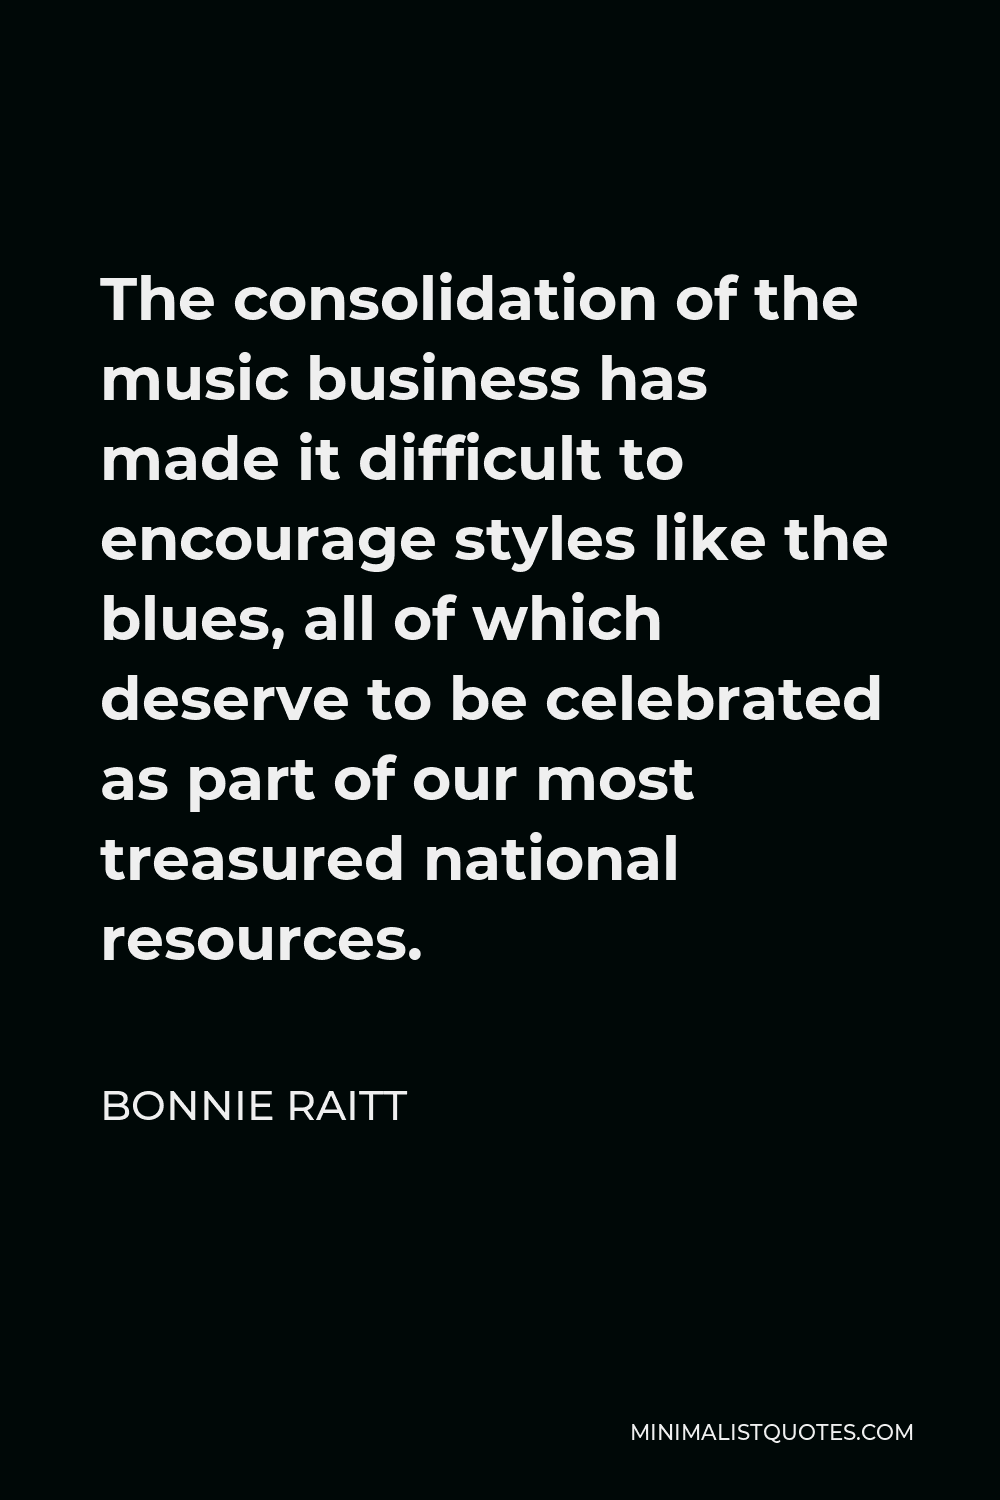 Bonnie Raitt Quote - The consolidation of the music business has made it difficult to encourage styles like the blues, all of which deserve to be celebrated as part of our most treasured national resources.